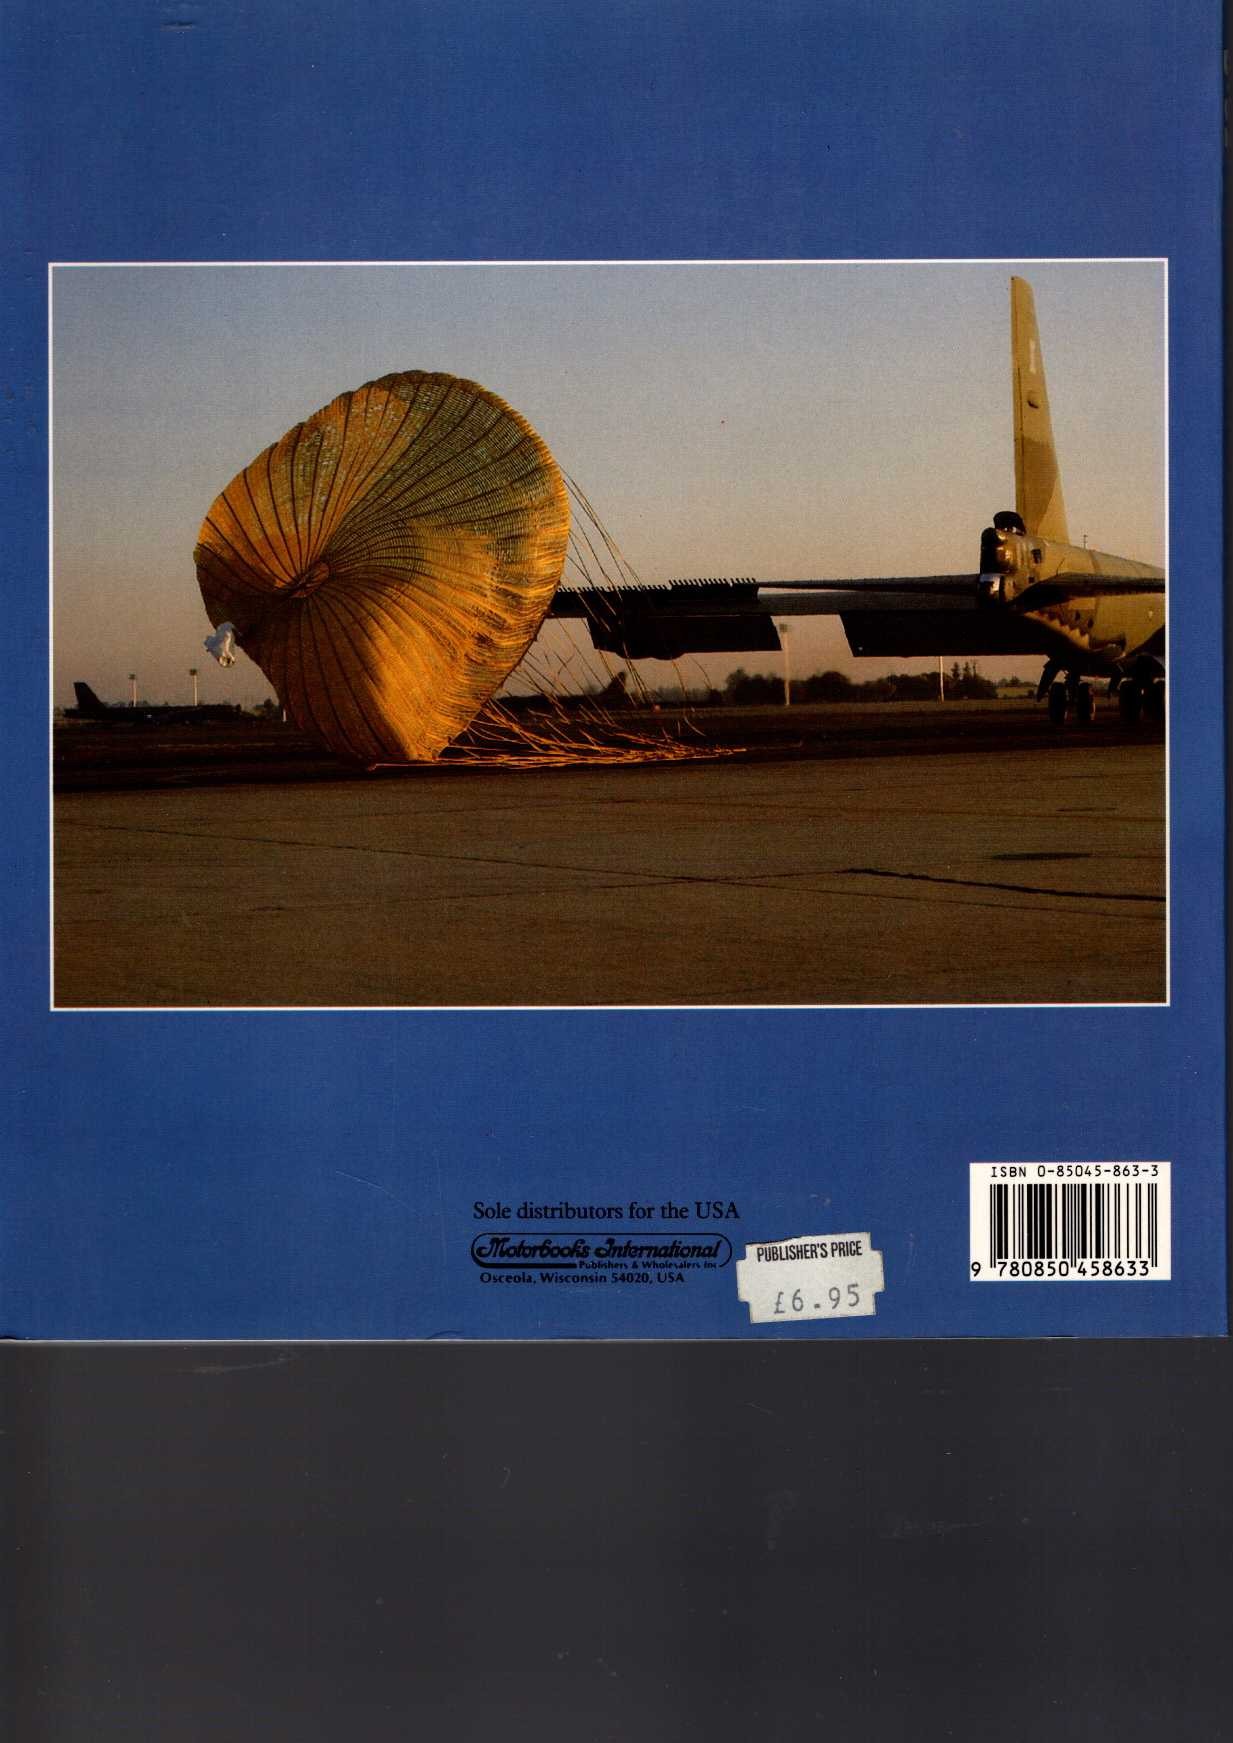 B-52 magnified rear book cover image